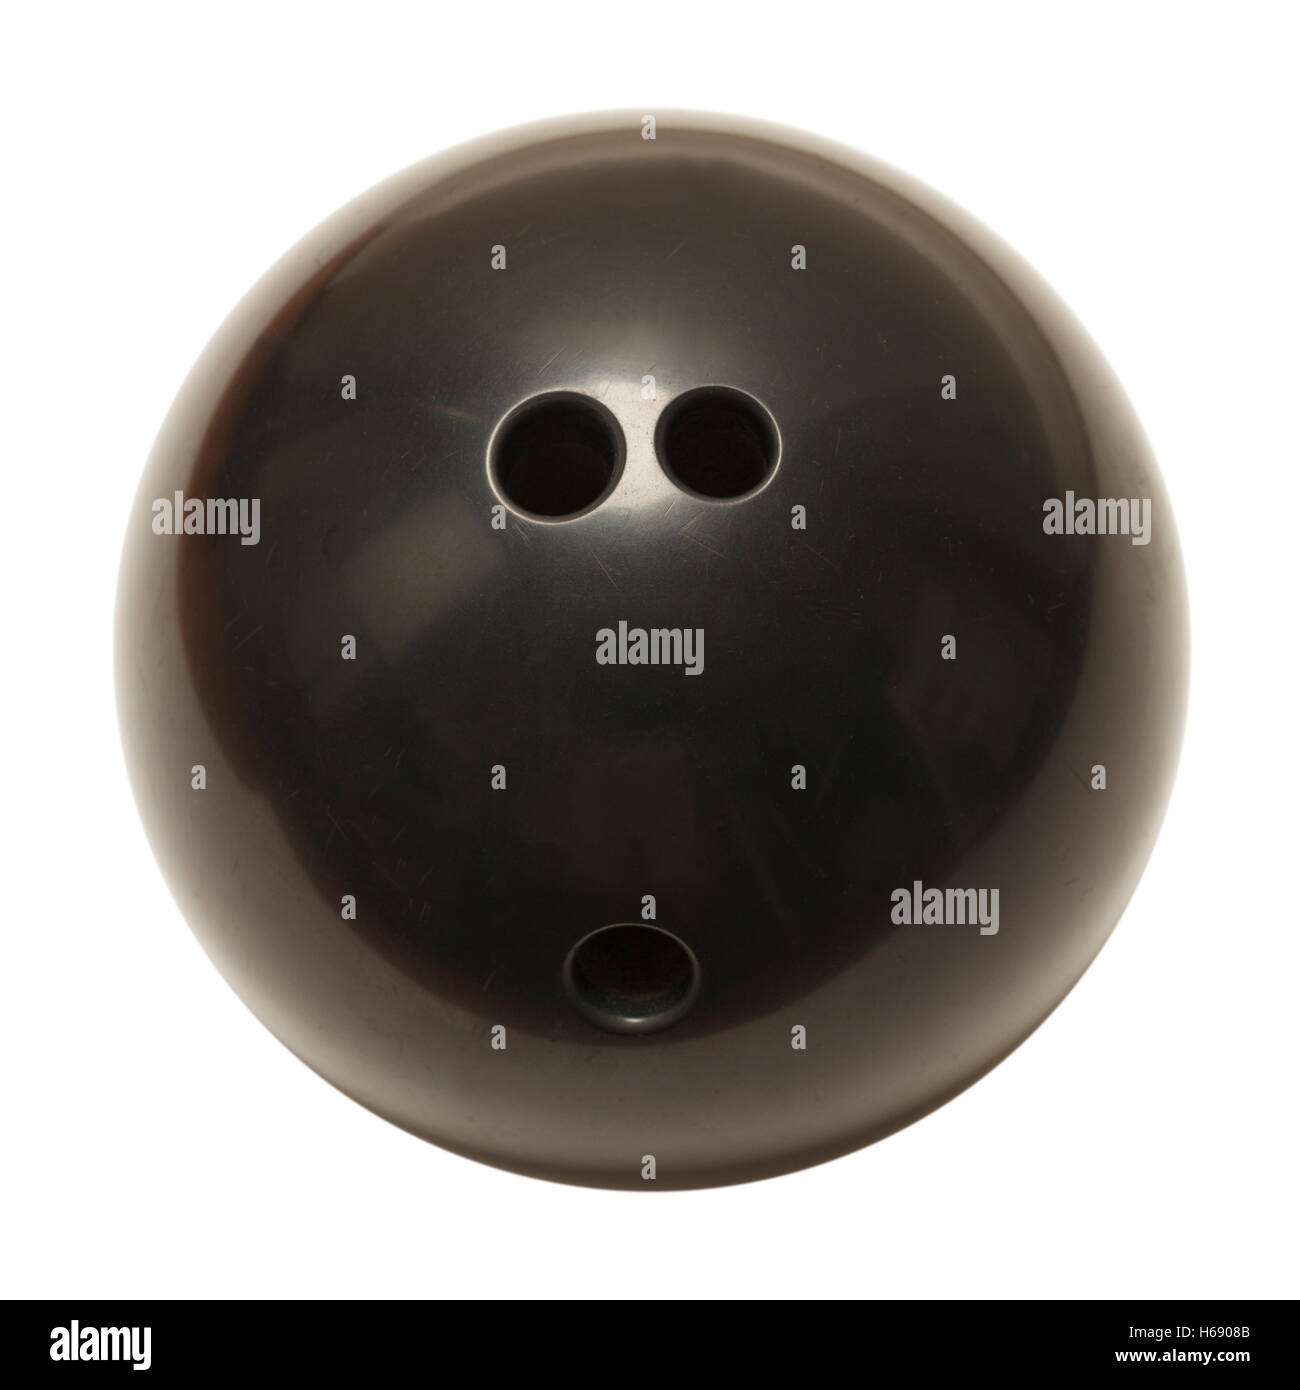 Black Bowling Ball with Holes Isolated on White Background. Stock Photo